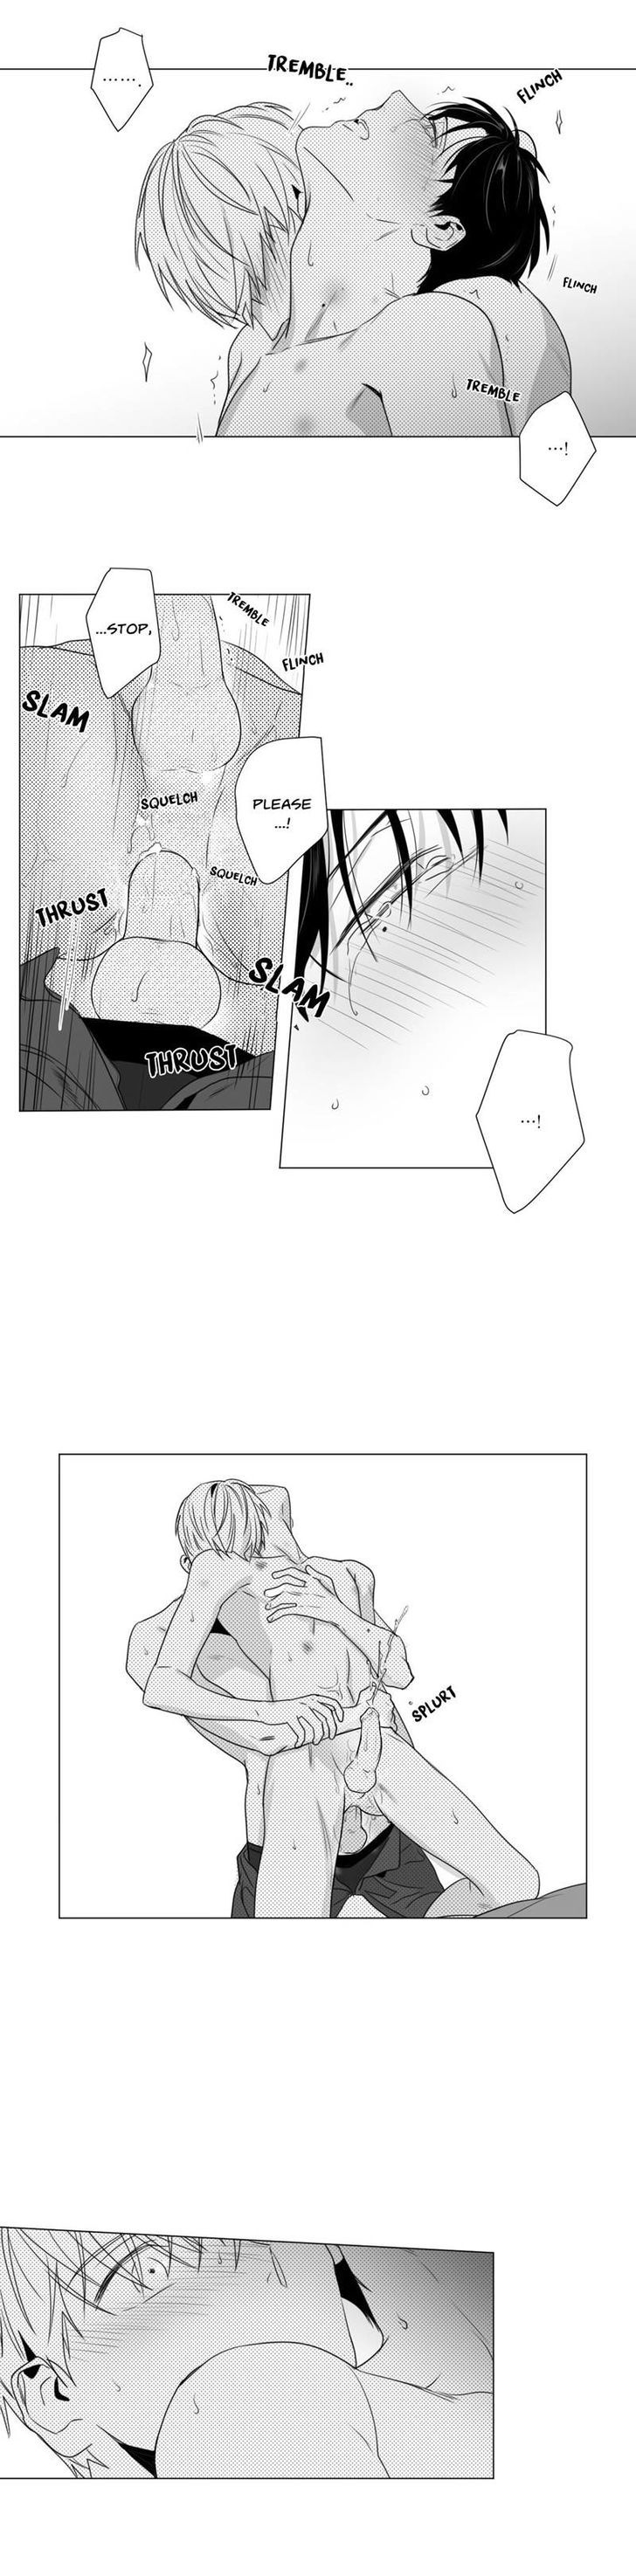 Lover Boy (Lezhin) Chapter 030 page 8